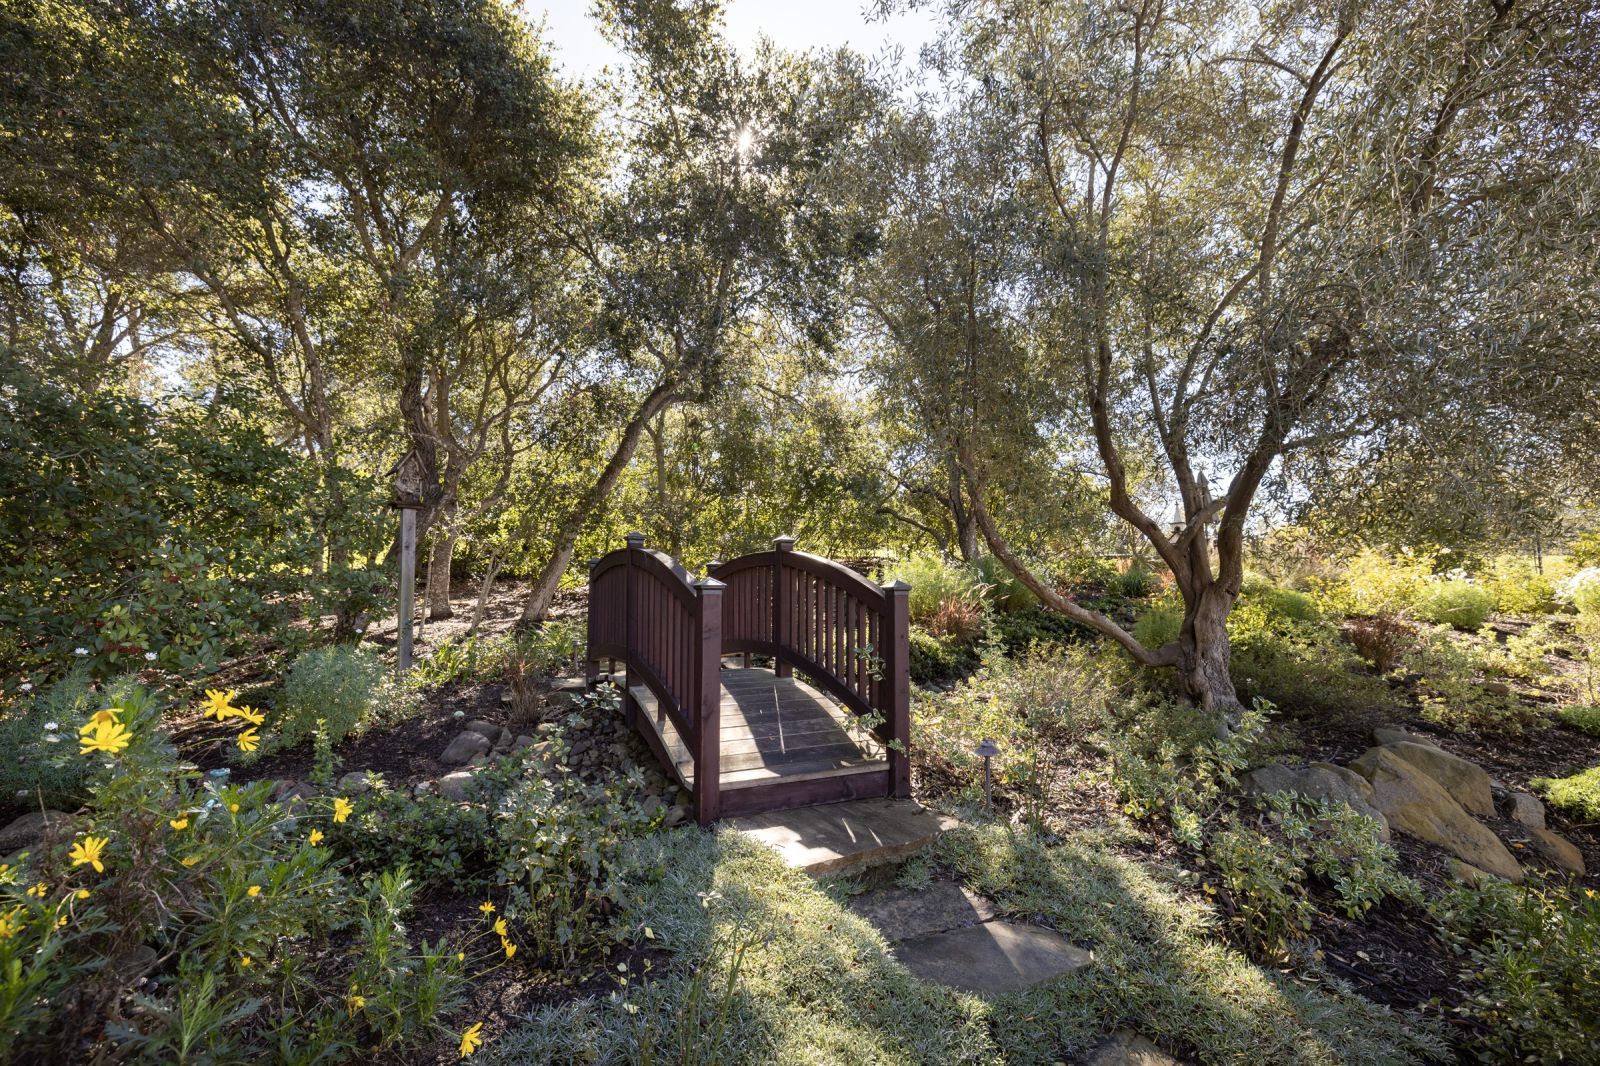 A little wooden footbridge over a creek amongst trees and shrubbery.